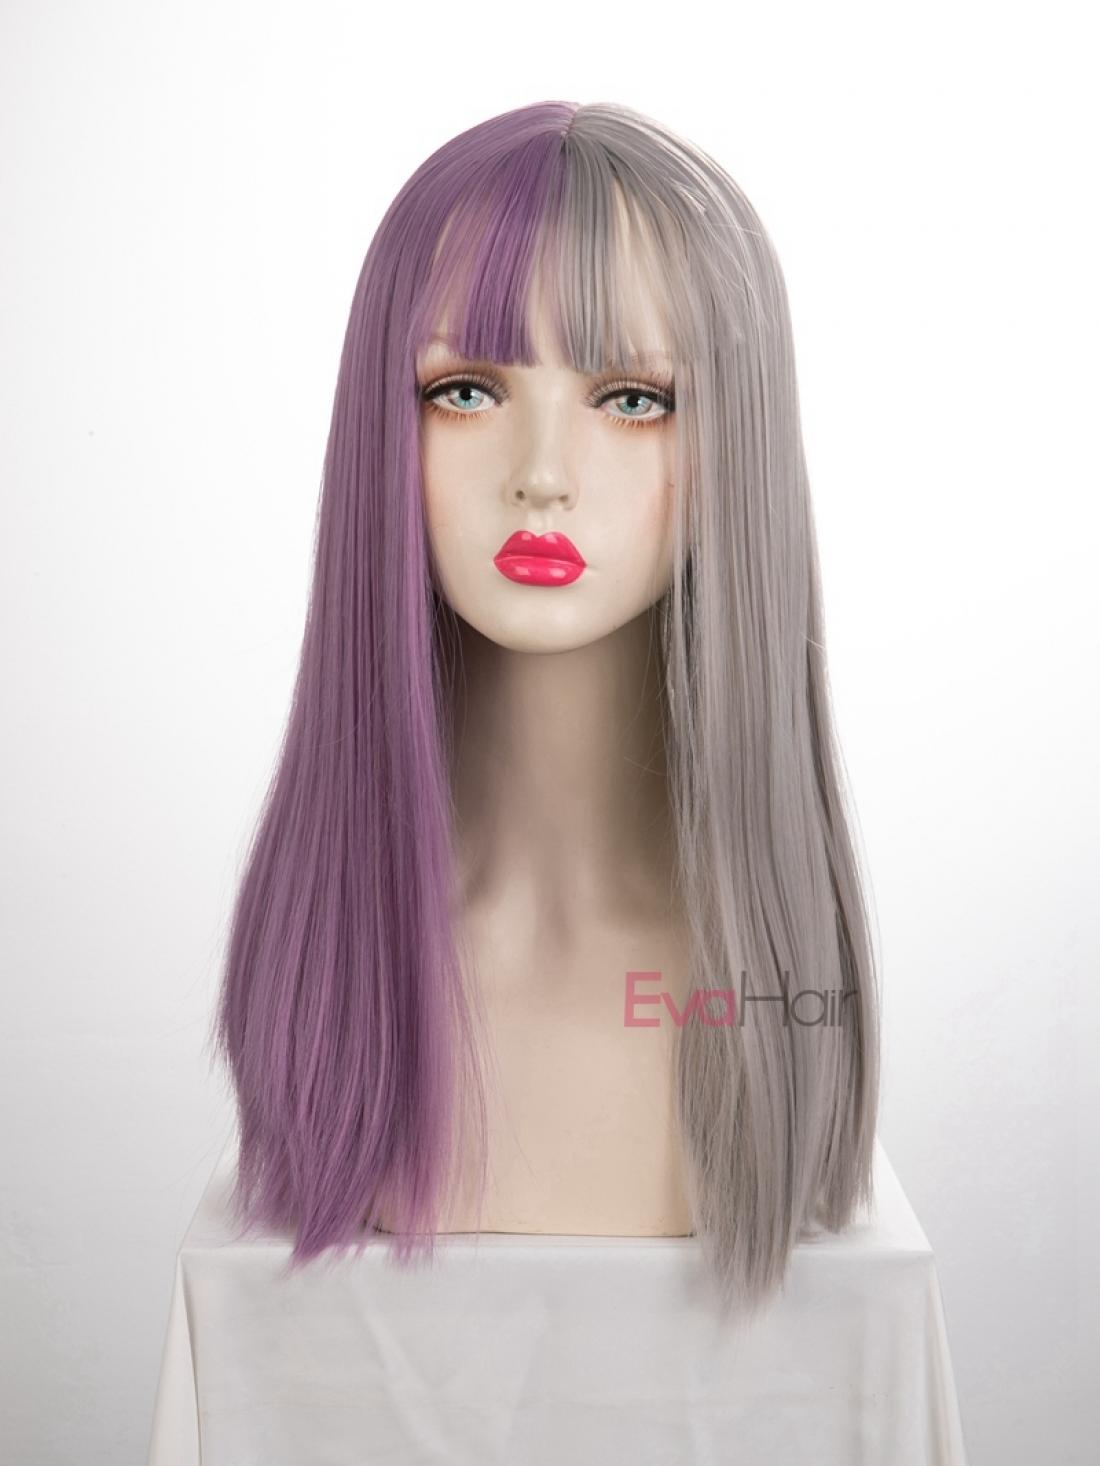 Evahair Half Purple And Half Grey Wefted Cap Long Straight Synthetic Wig With Bangs Home Evahair